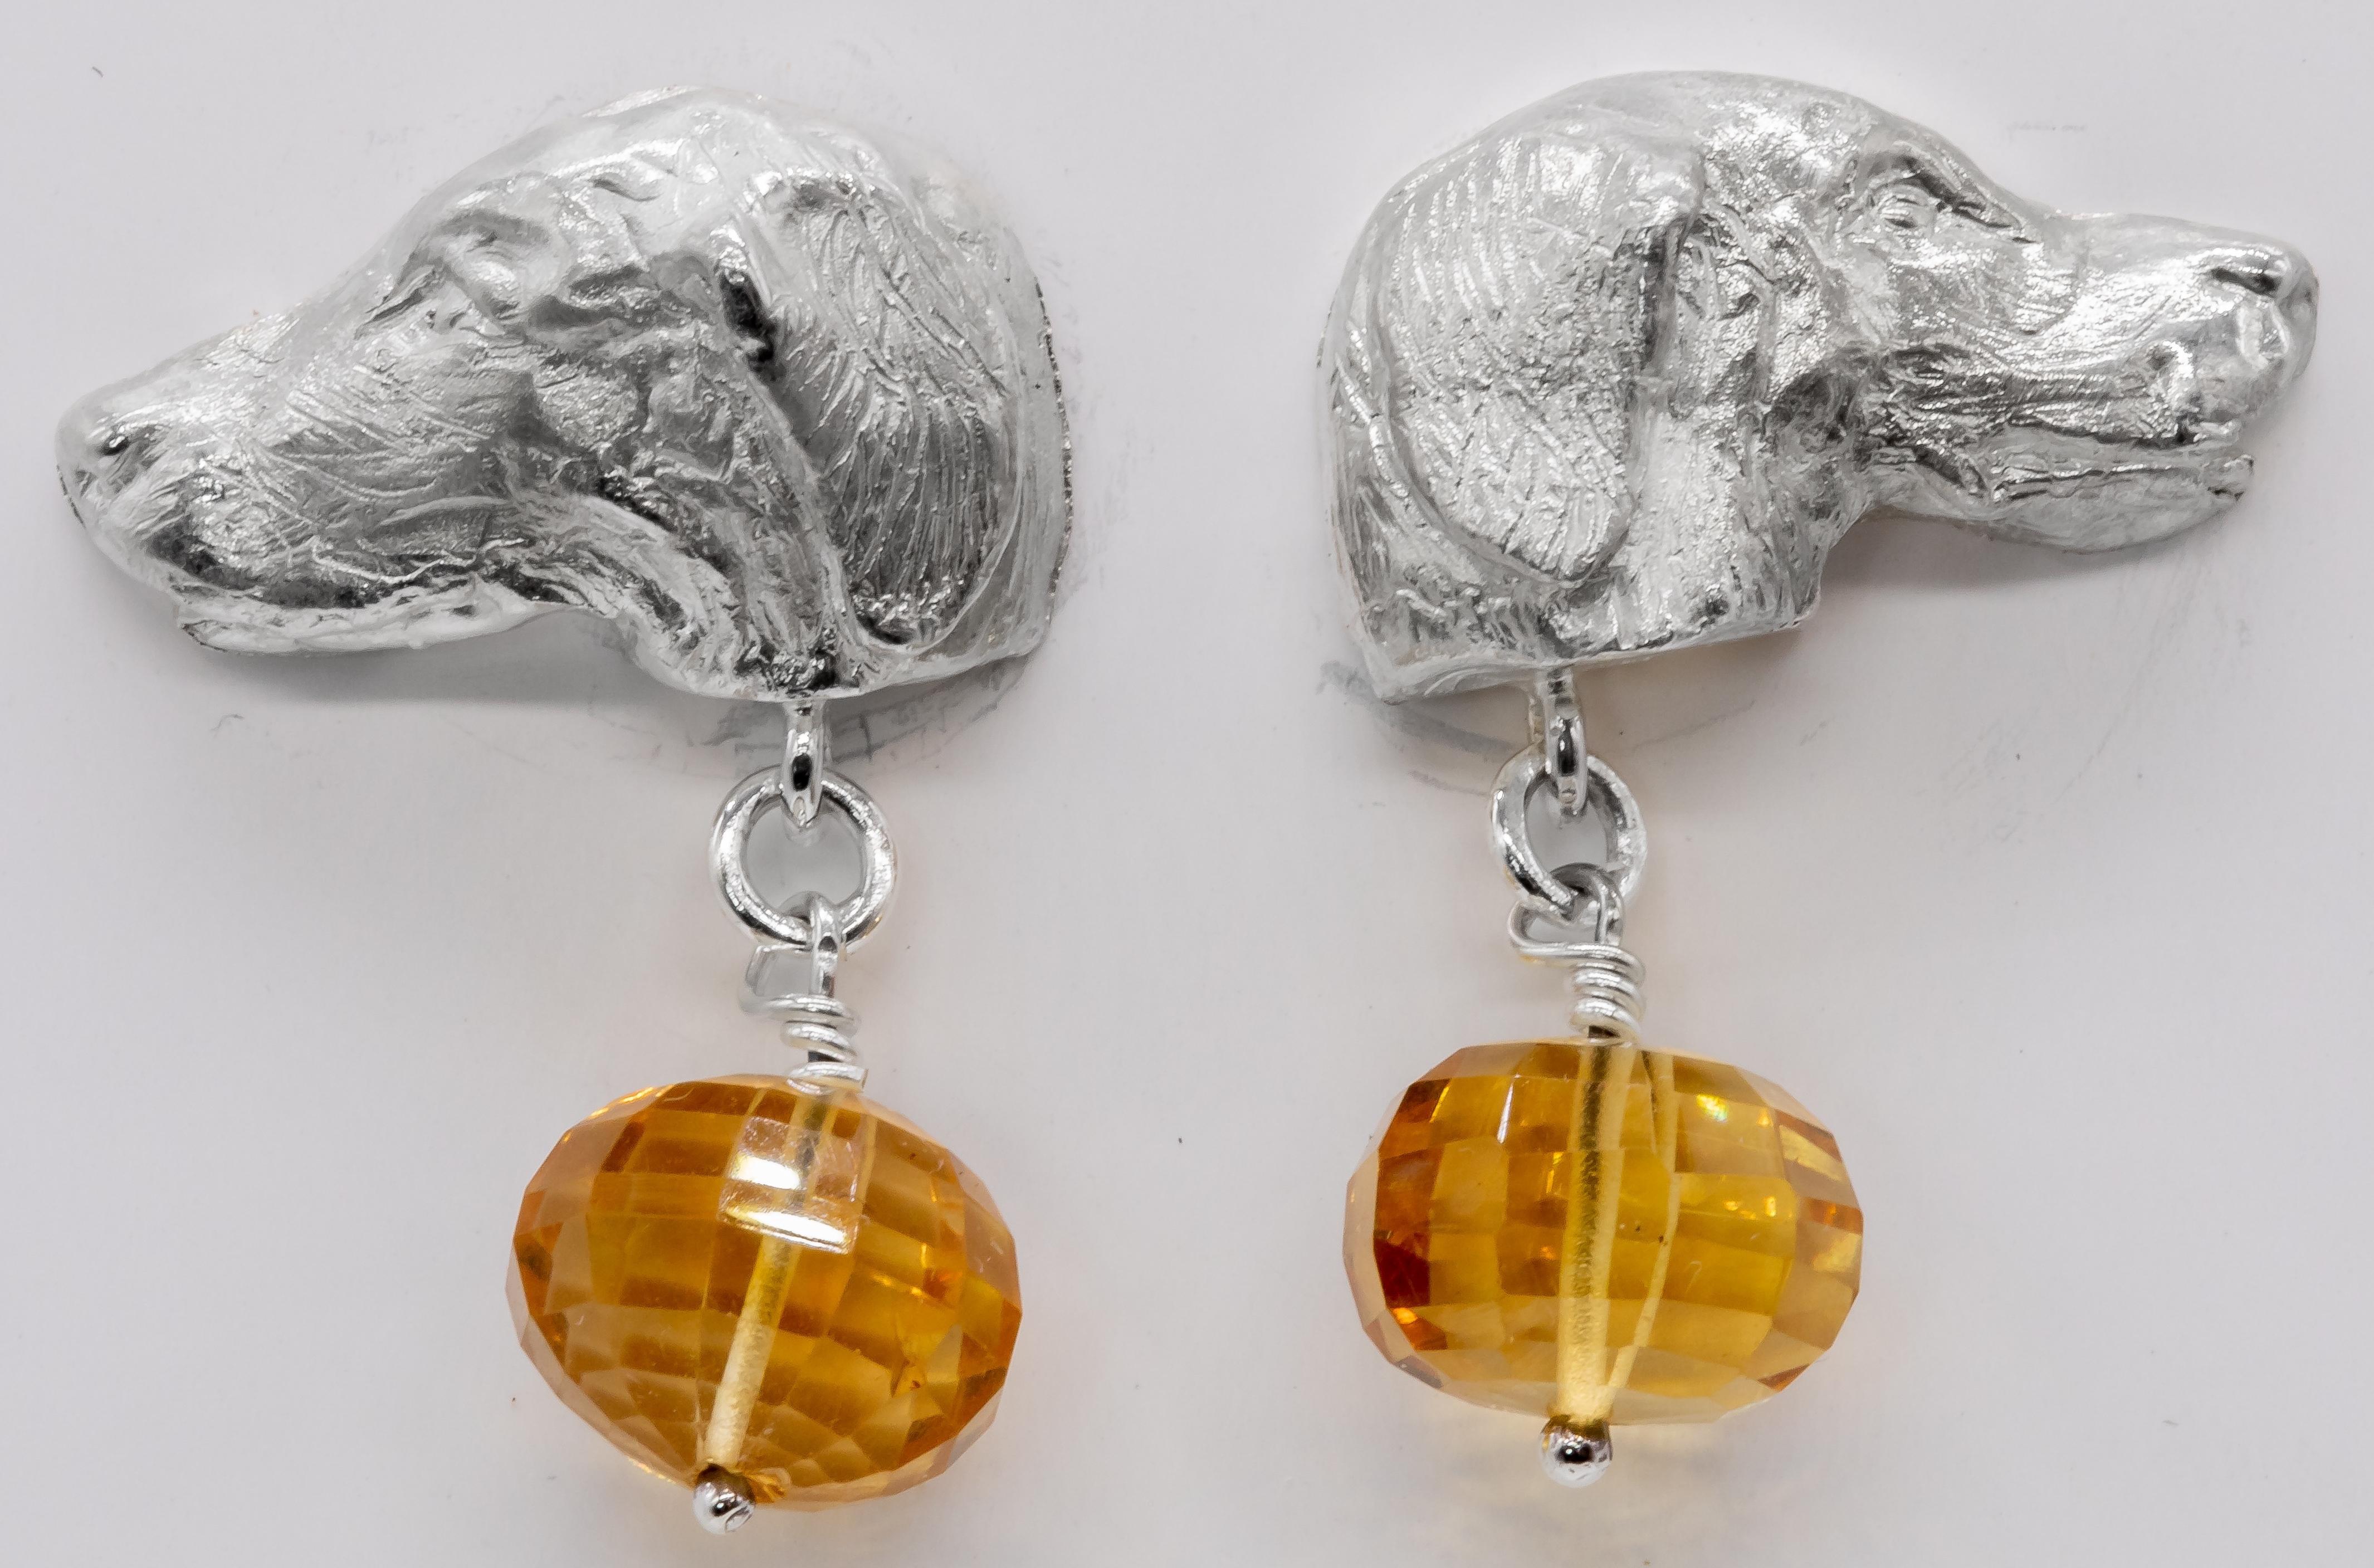    From Great Britain Paul Eaton VPRMS MAA sculpted sterling silver Retriever dog head stud earrings with Citrine beads drop (1/2